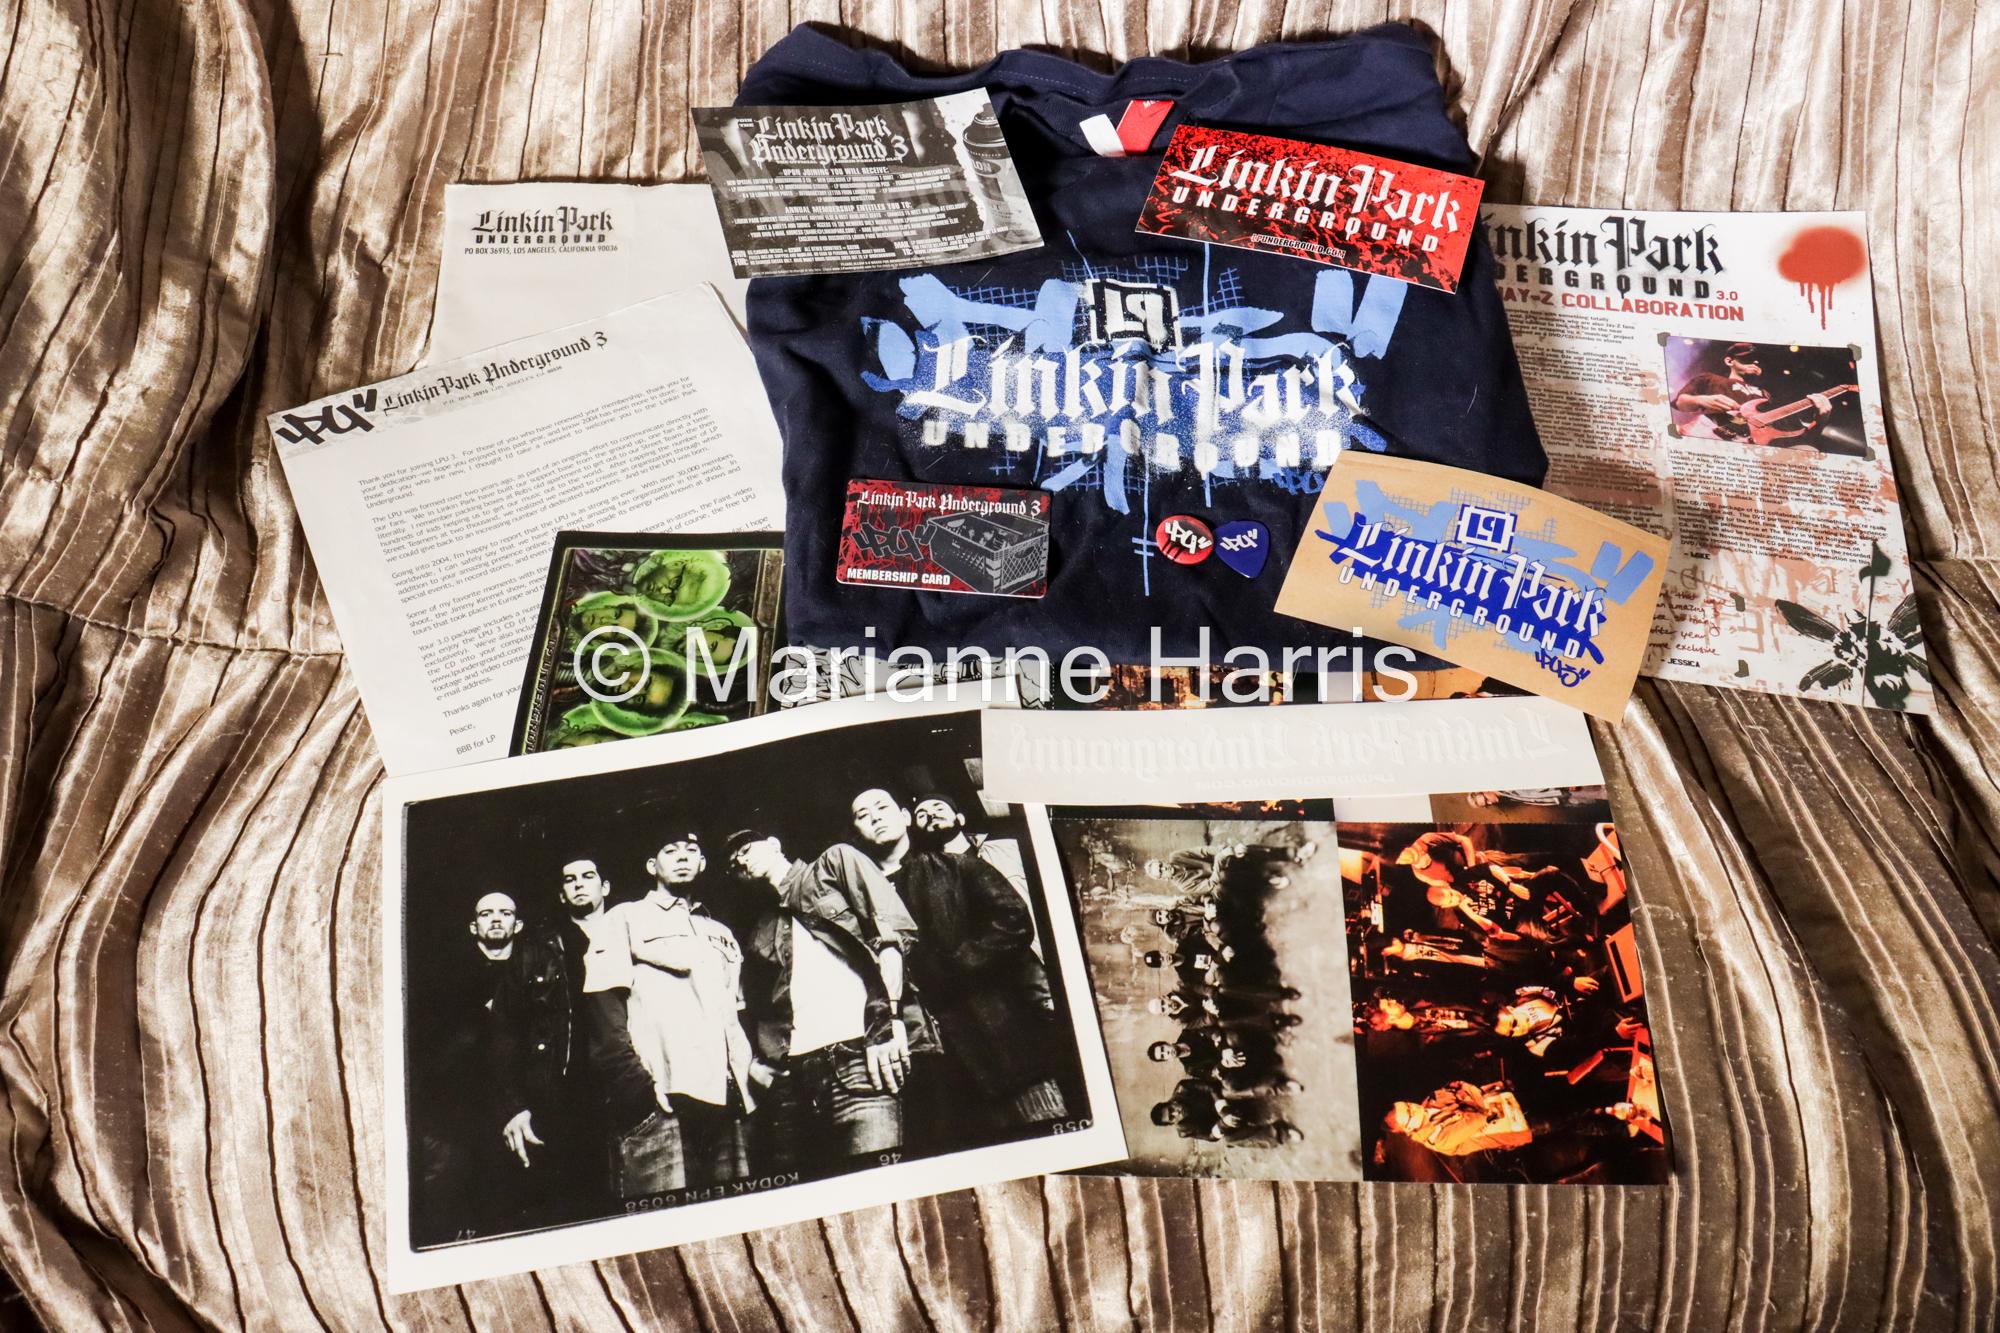 Linkin Park Underground 3 membership package, without CD